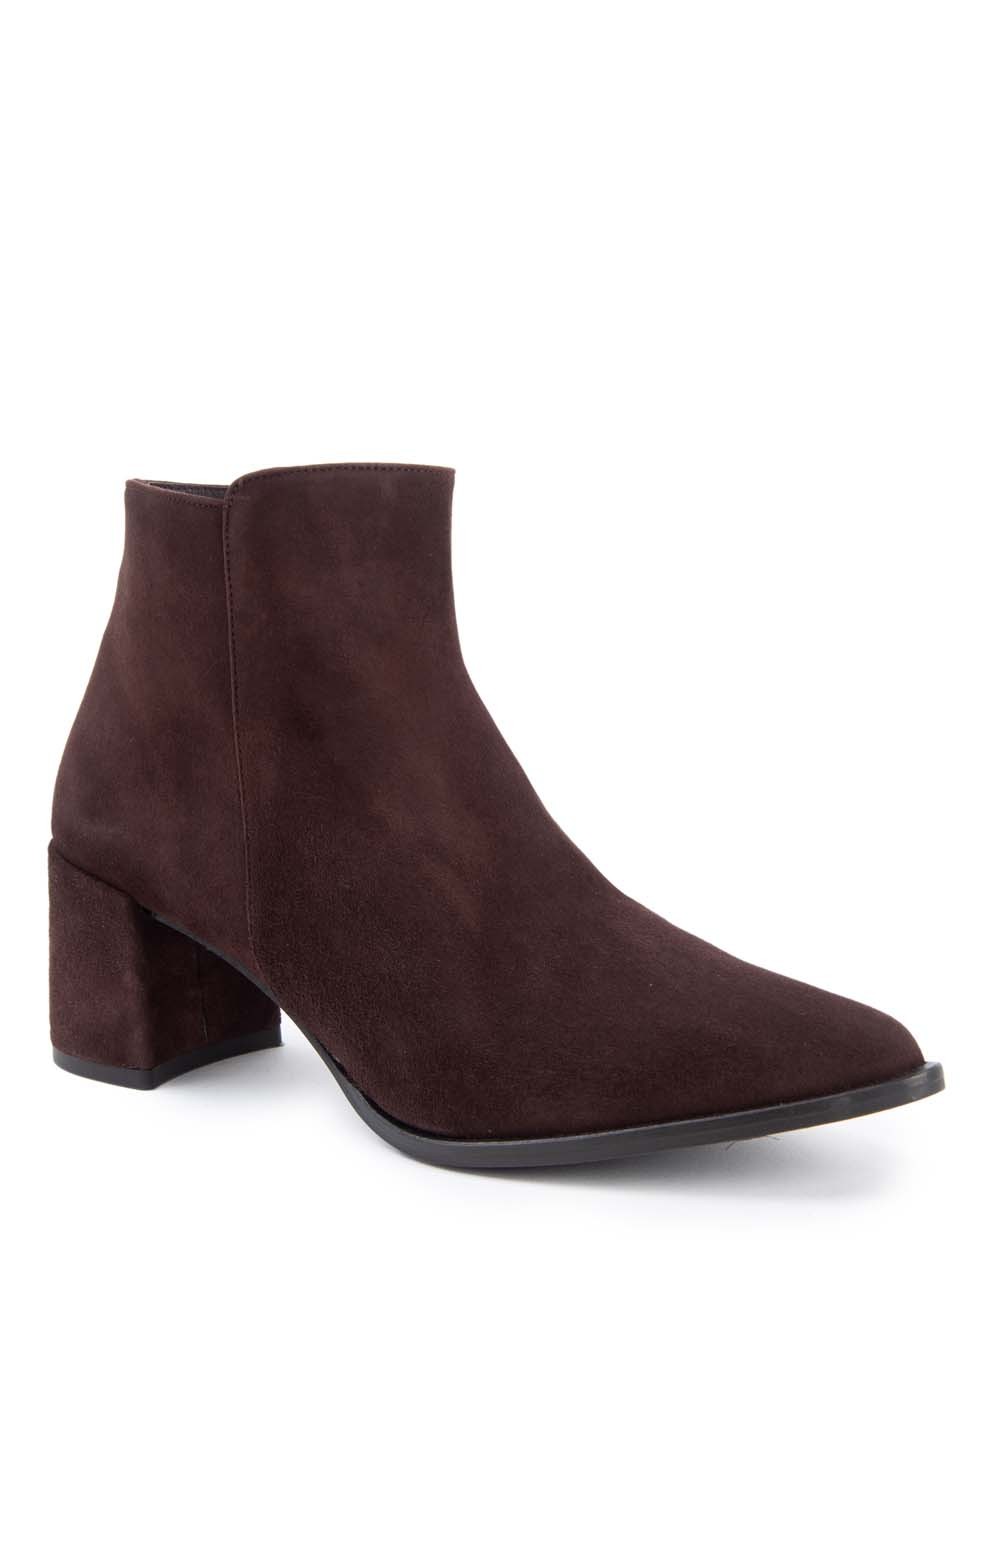 house of bruar suede boots